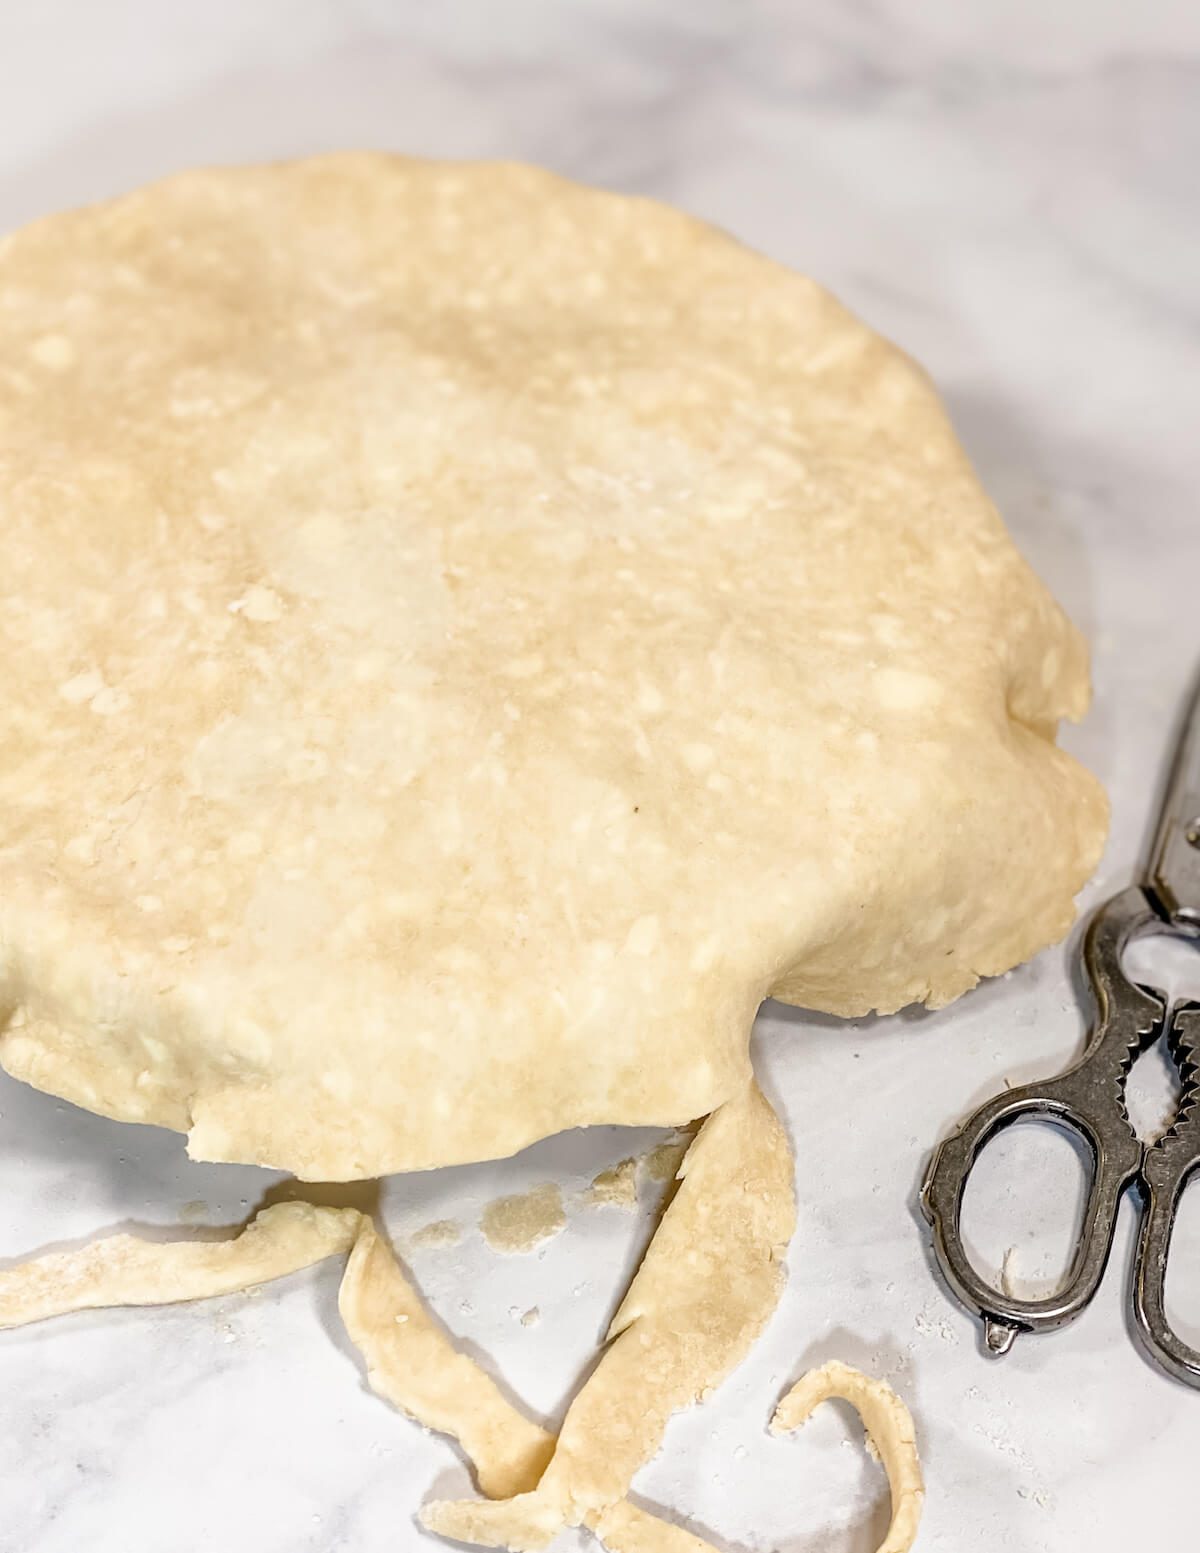 trimming pastry crust with kitchen shears